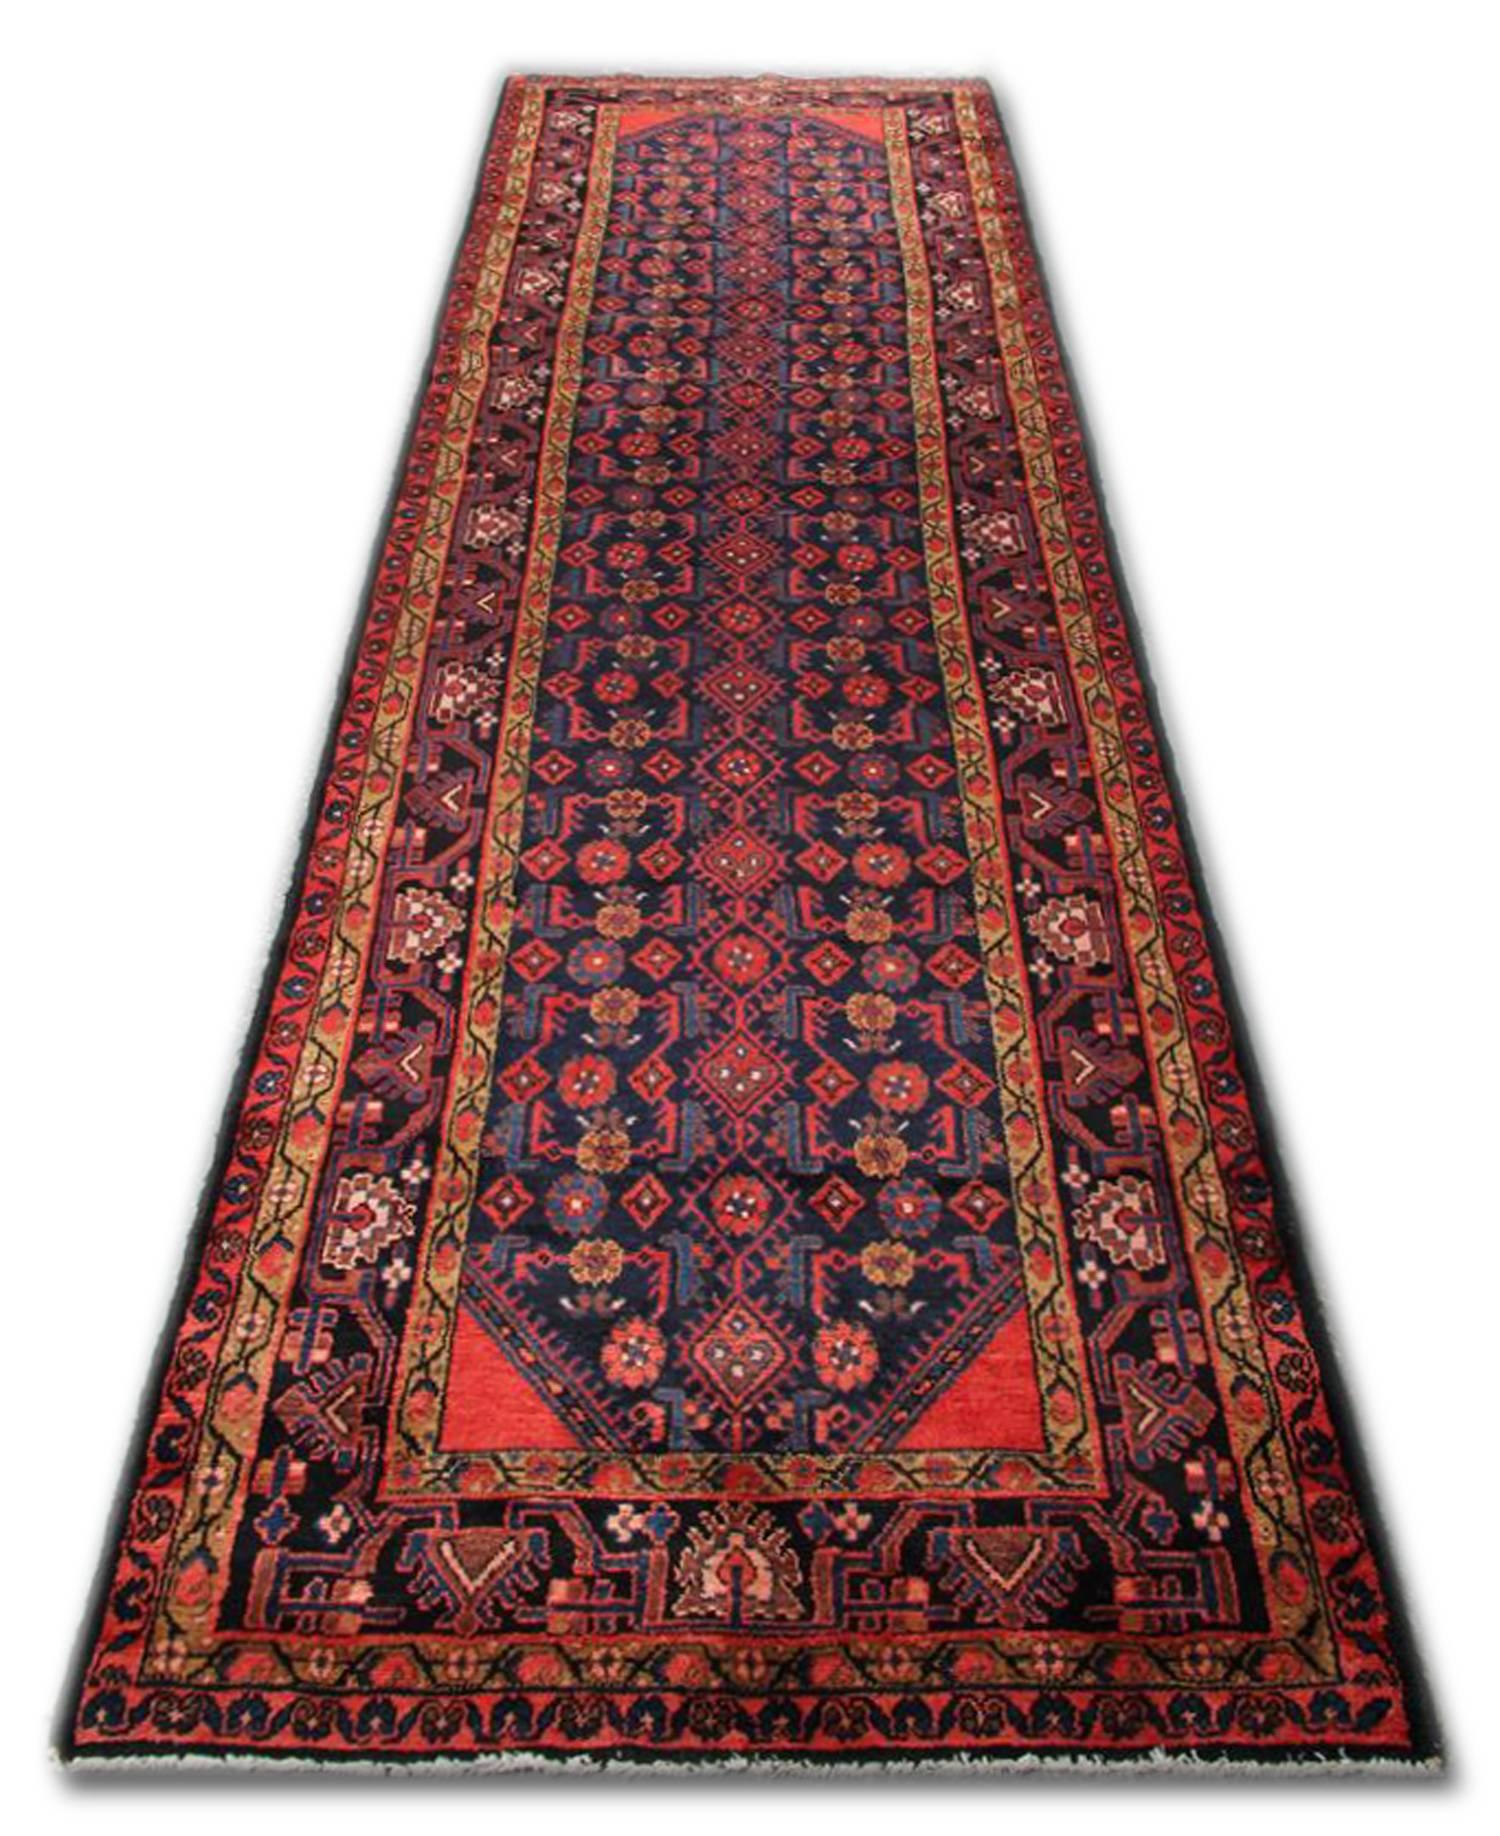 This beautiful wool rug was handwoven in Afghanistan in 1950. This beautiful wool rug features a red background with an intricately woven repeat pattern with a highly detailed layered border. Both the colour and design in this wool rug make it the